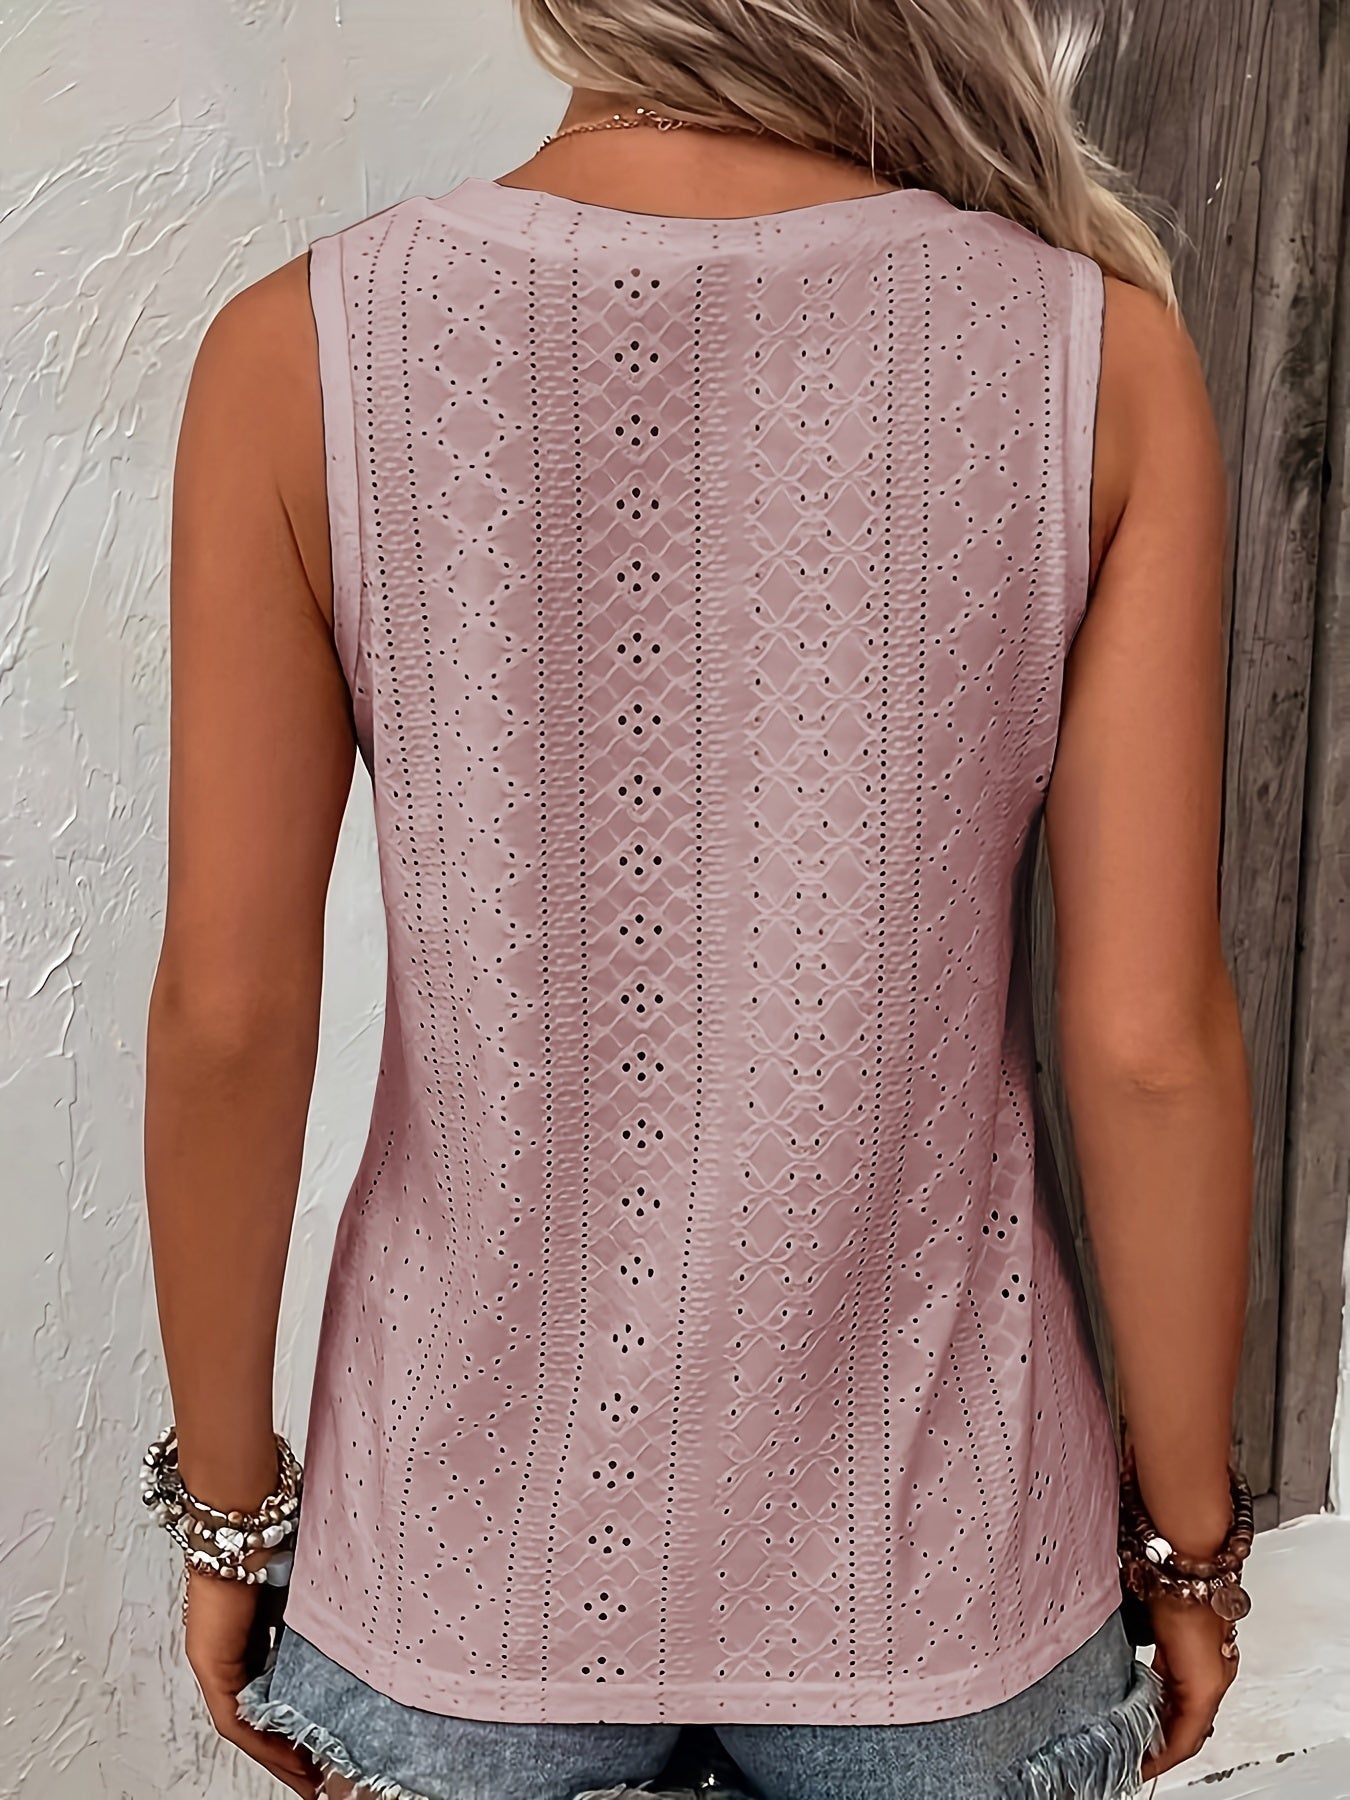 Plus Size Casual Tank Top, Women's Plus Solid Jacquard Eyelet Embroidered Button Decor V Neck Medium Stretch Tank Top